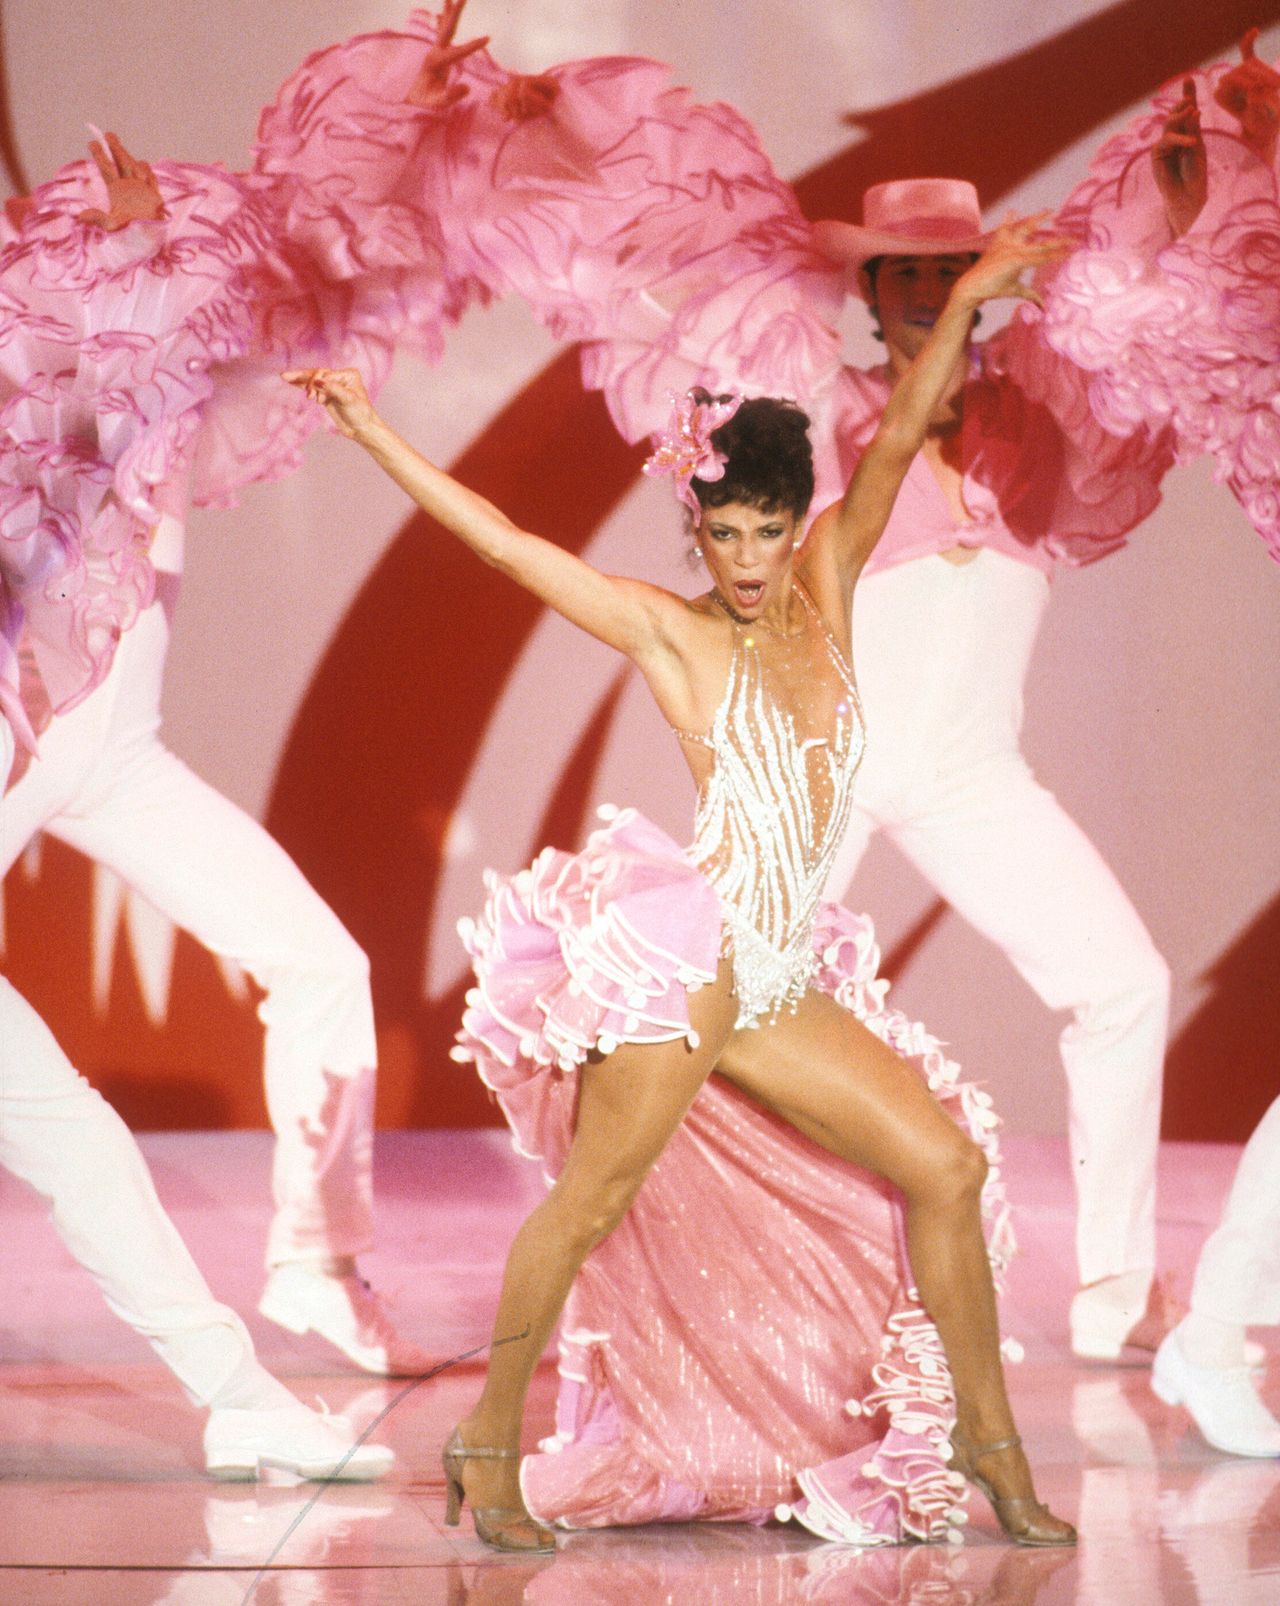 Allen performing at the Academy Awards on March 29, 1982.